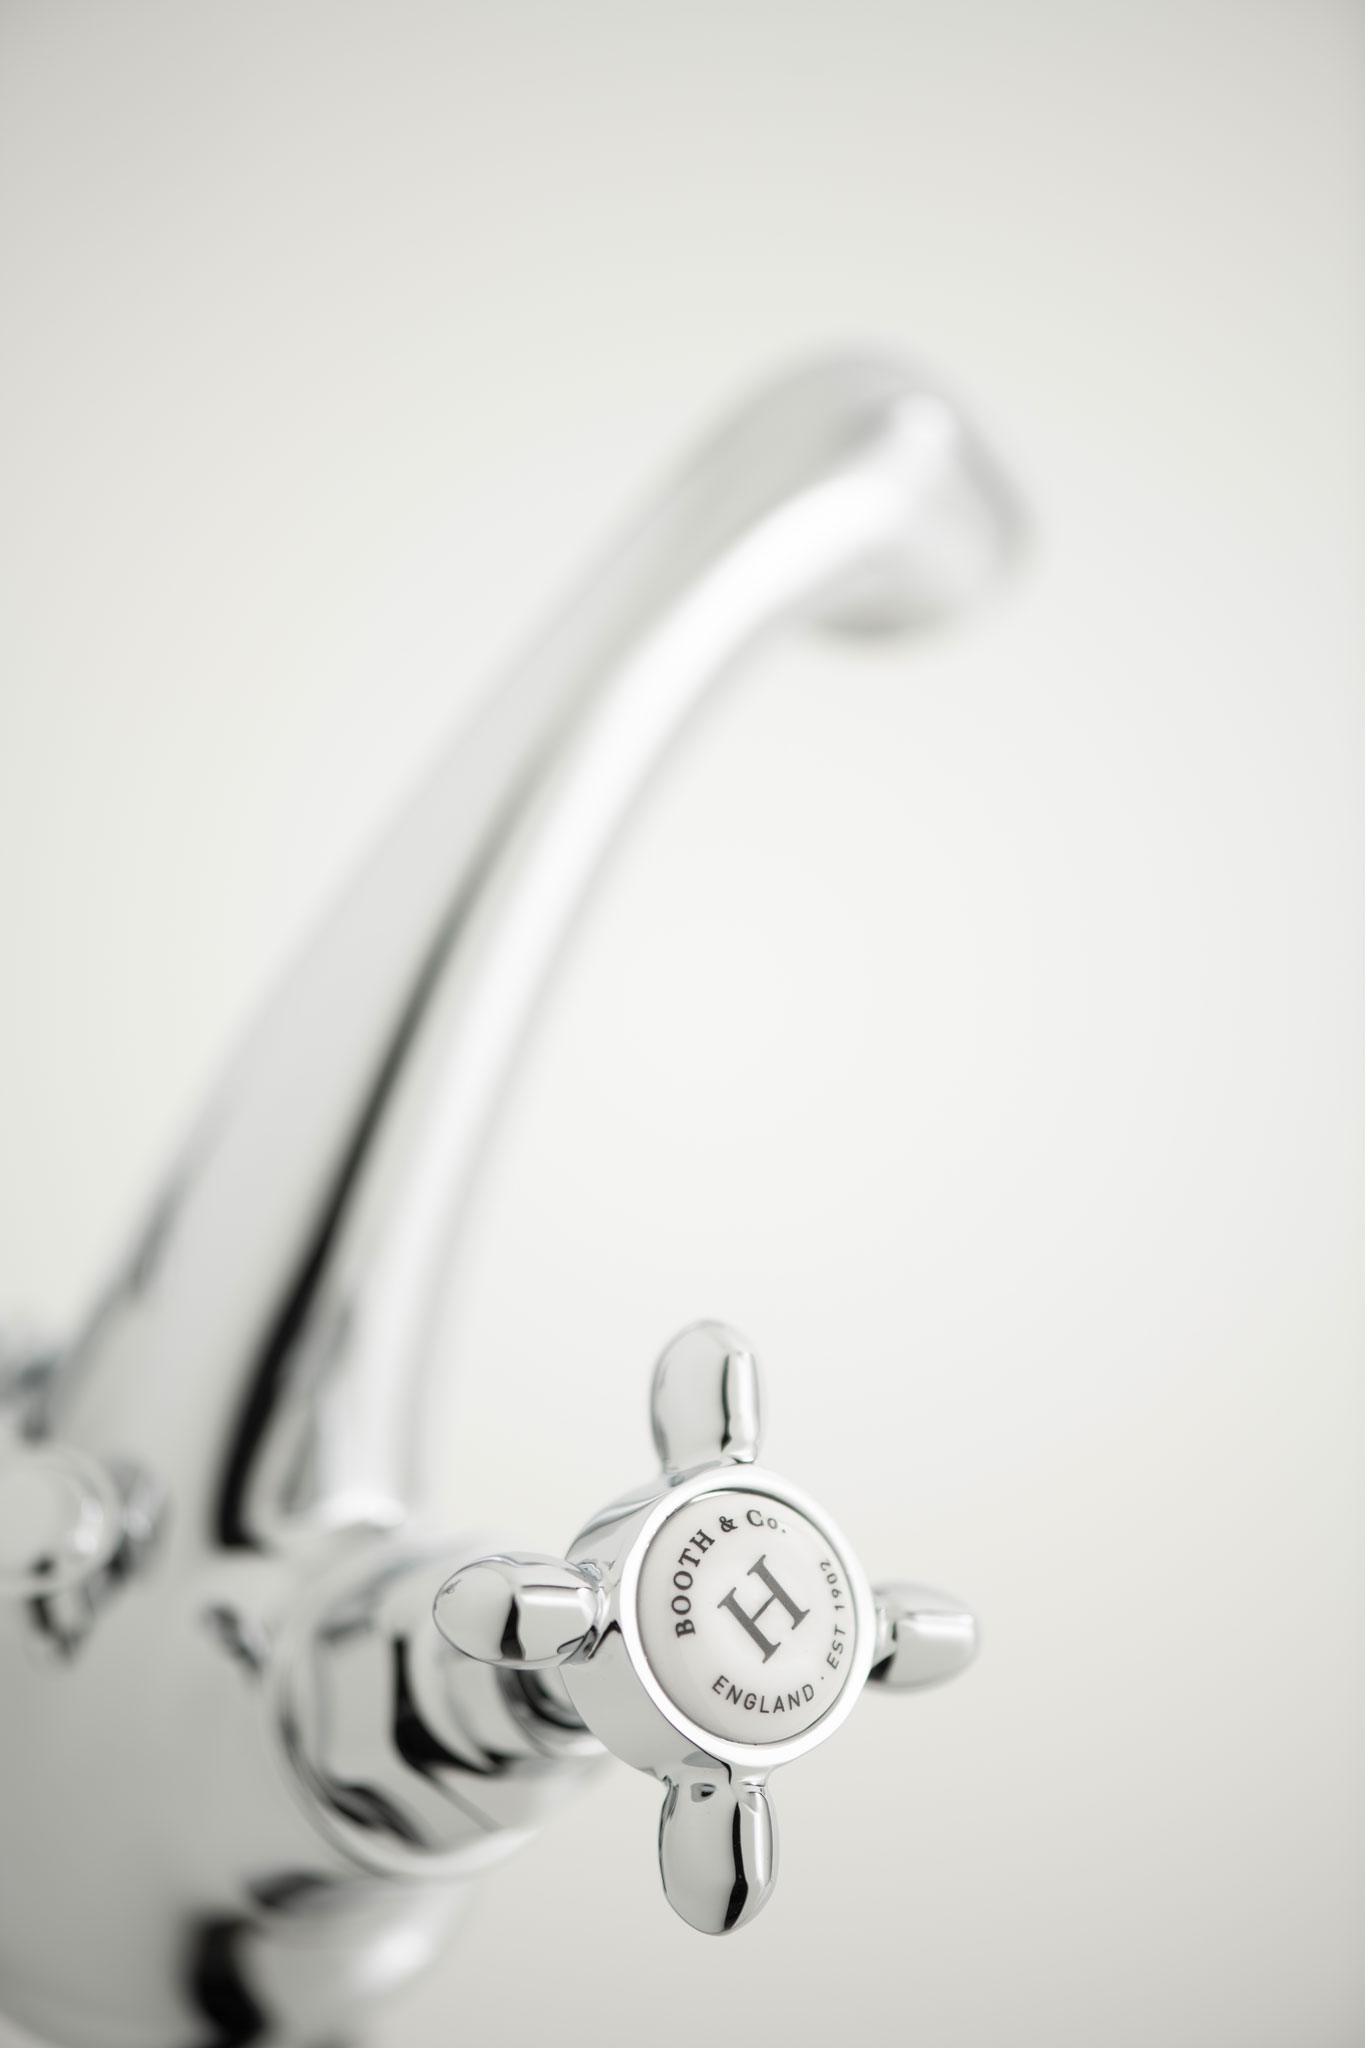 Traditional basin mixer hot handle and spout